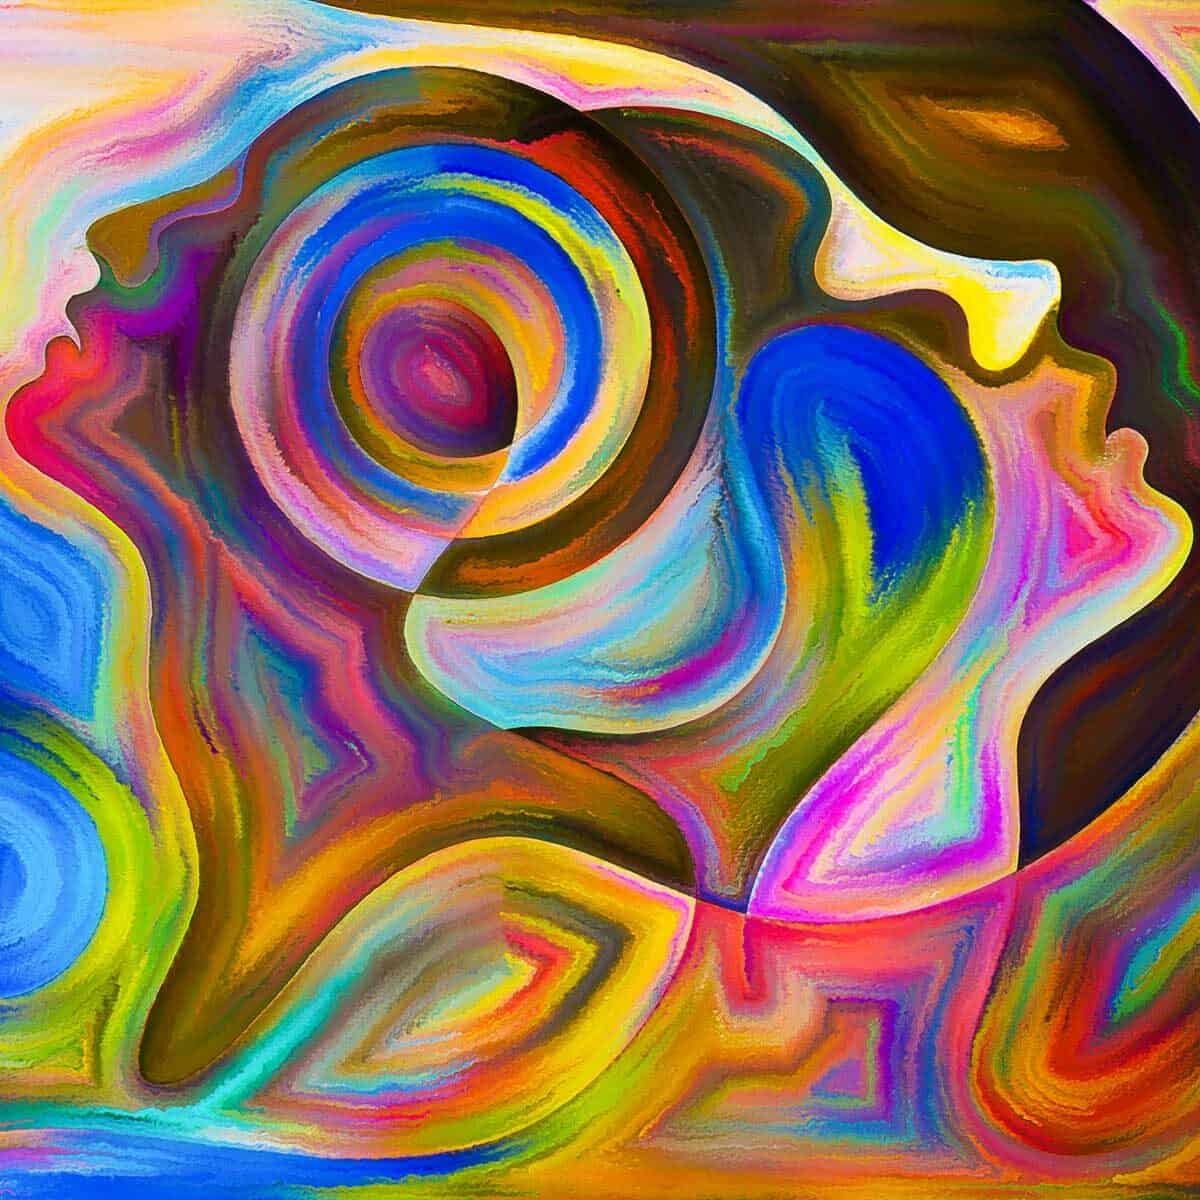 Two faces of a woman combined, back to back with swirls of color exhibiting emotions.